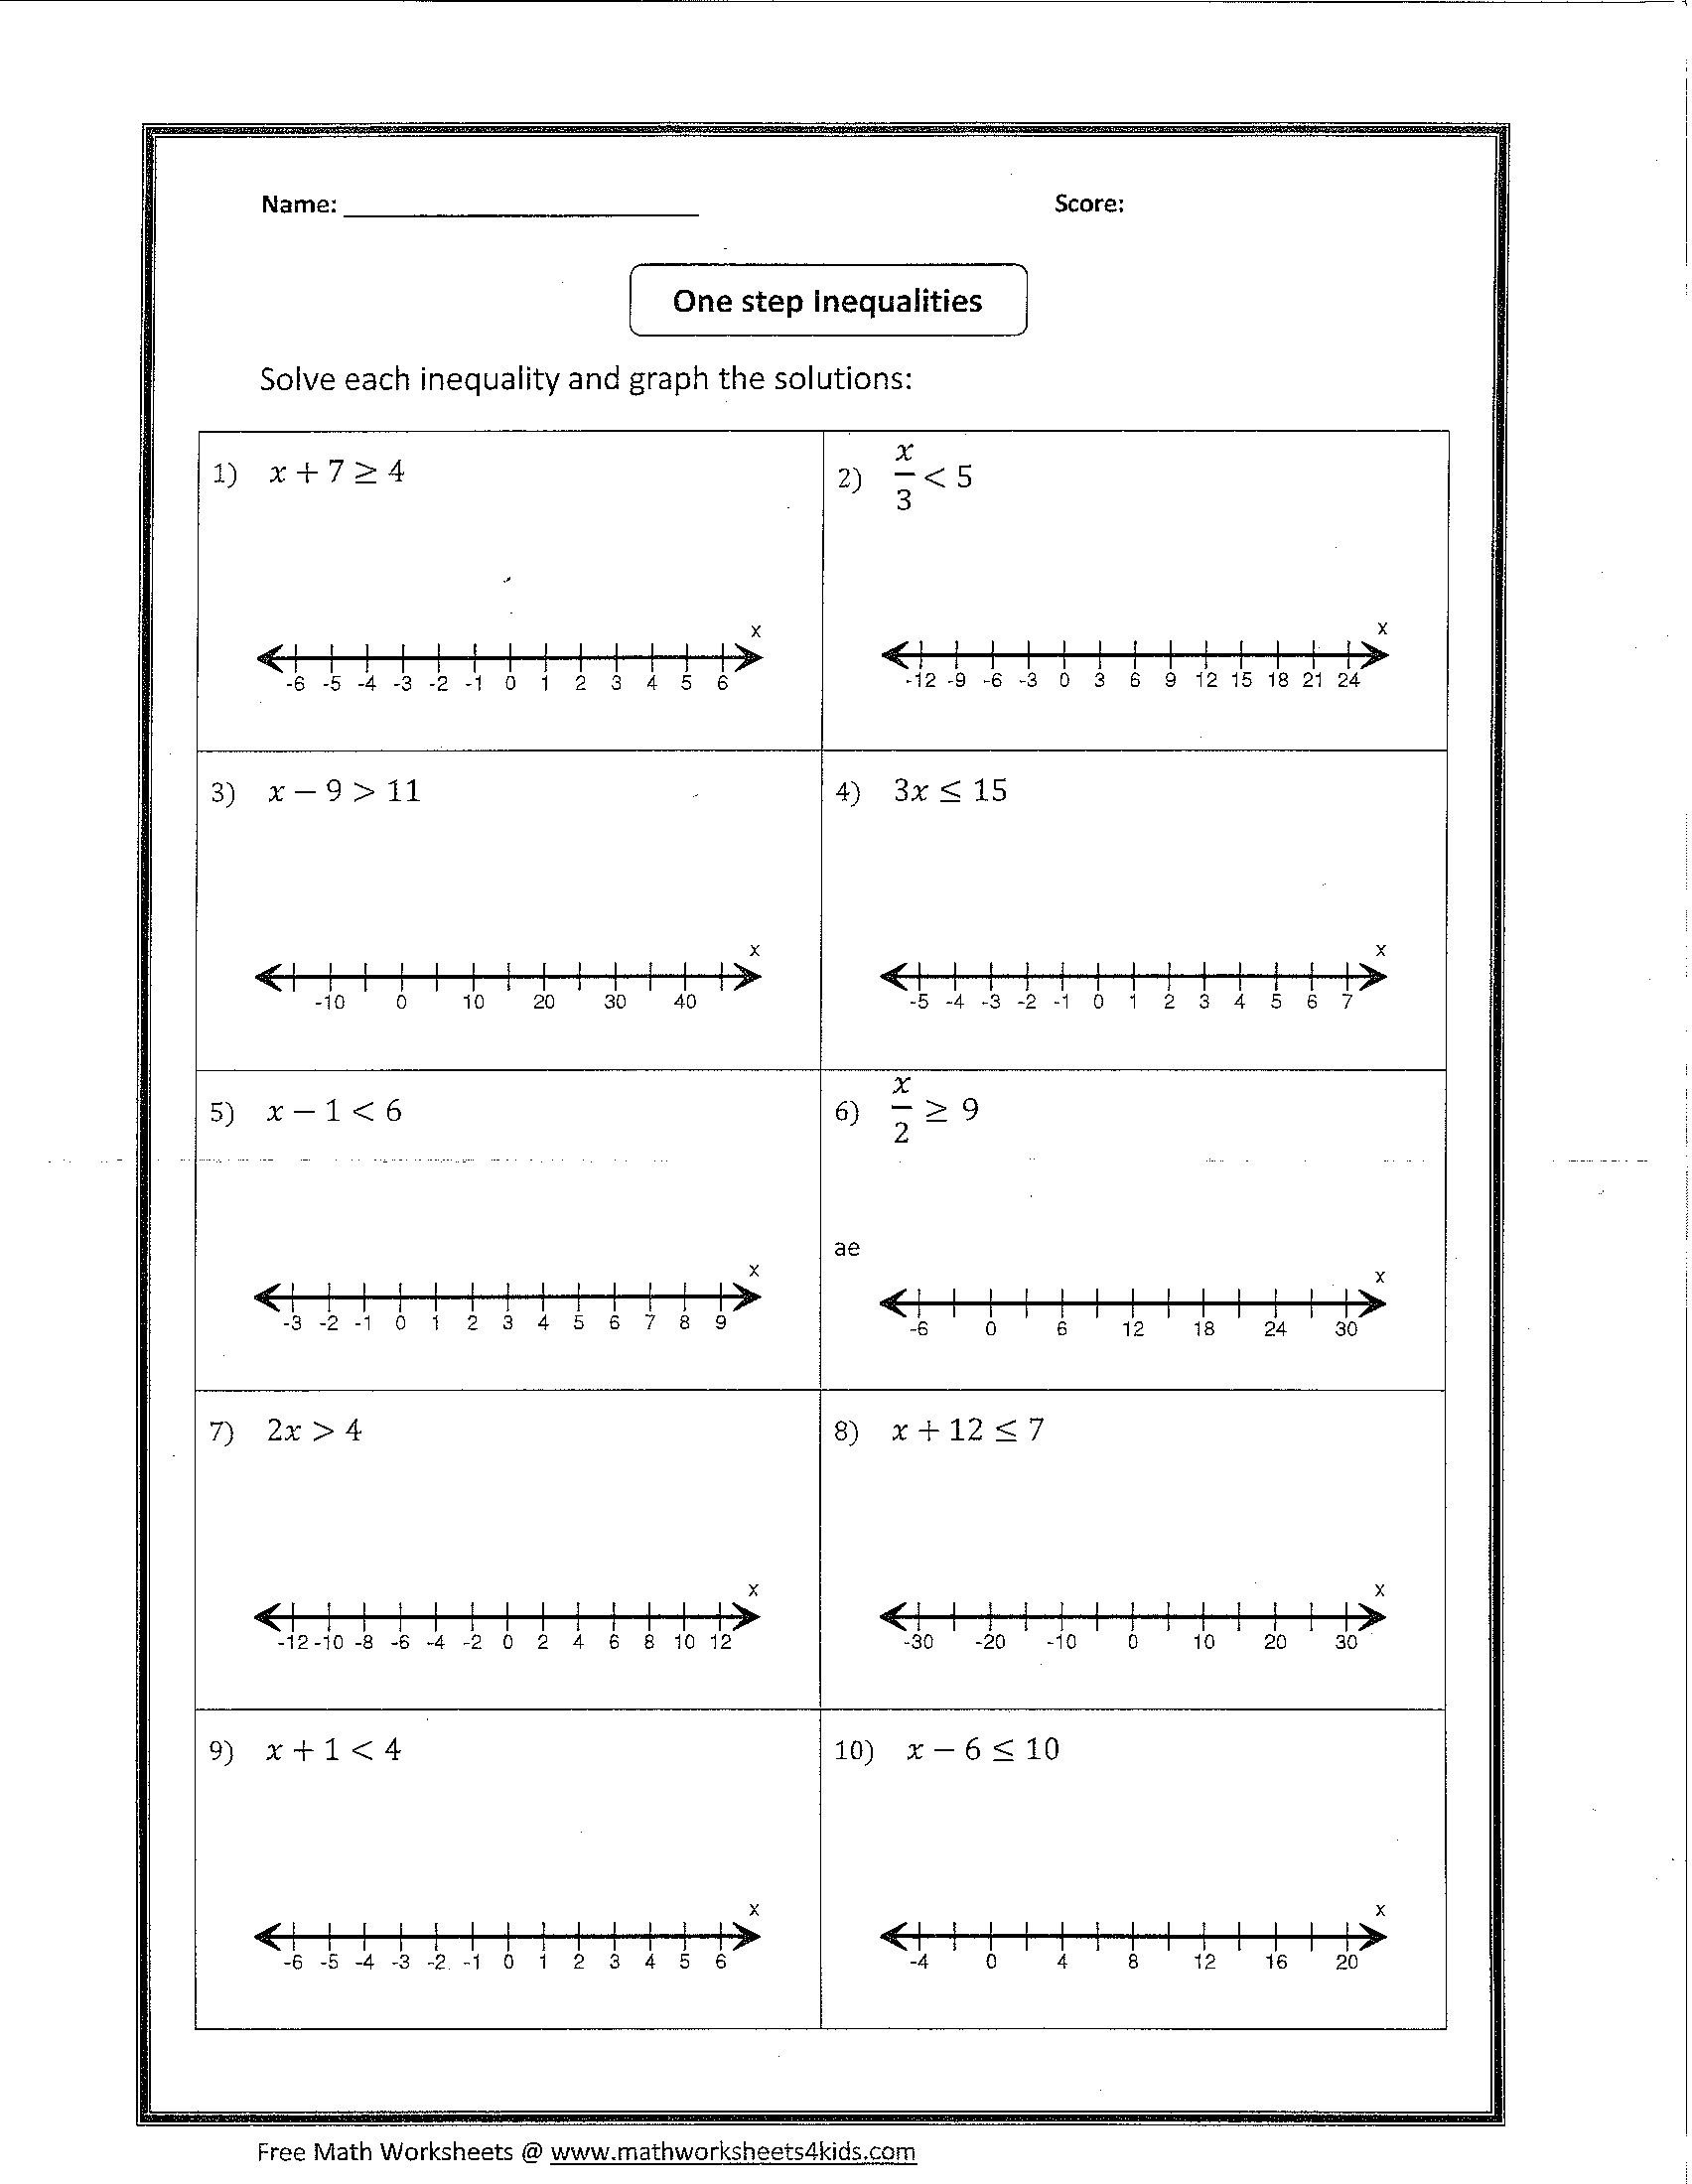 Solving And Graphing Inequalities Worksheet Answers  Briefencounters Within Solve And Graph The Inequalities Worksheet Answers